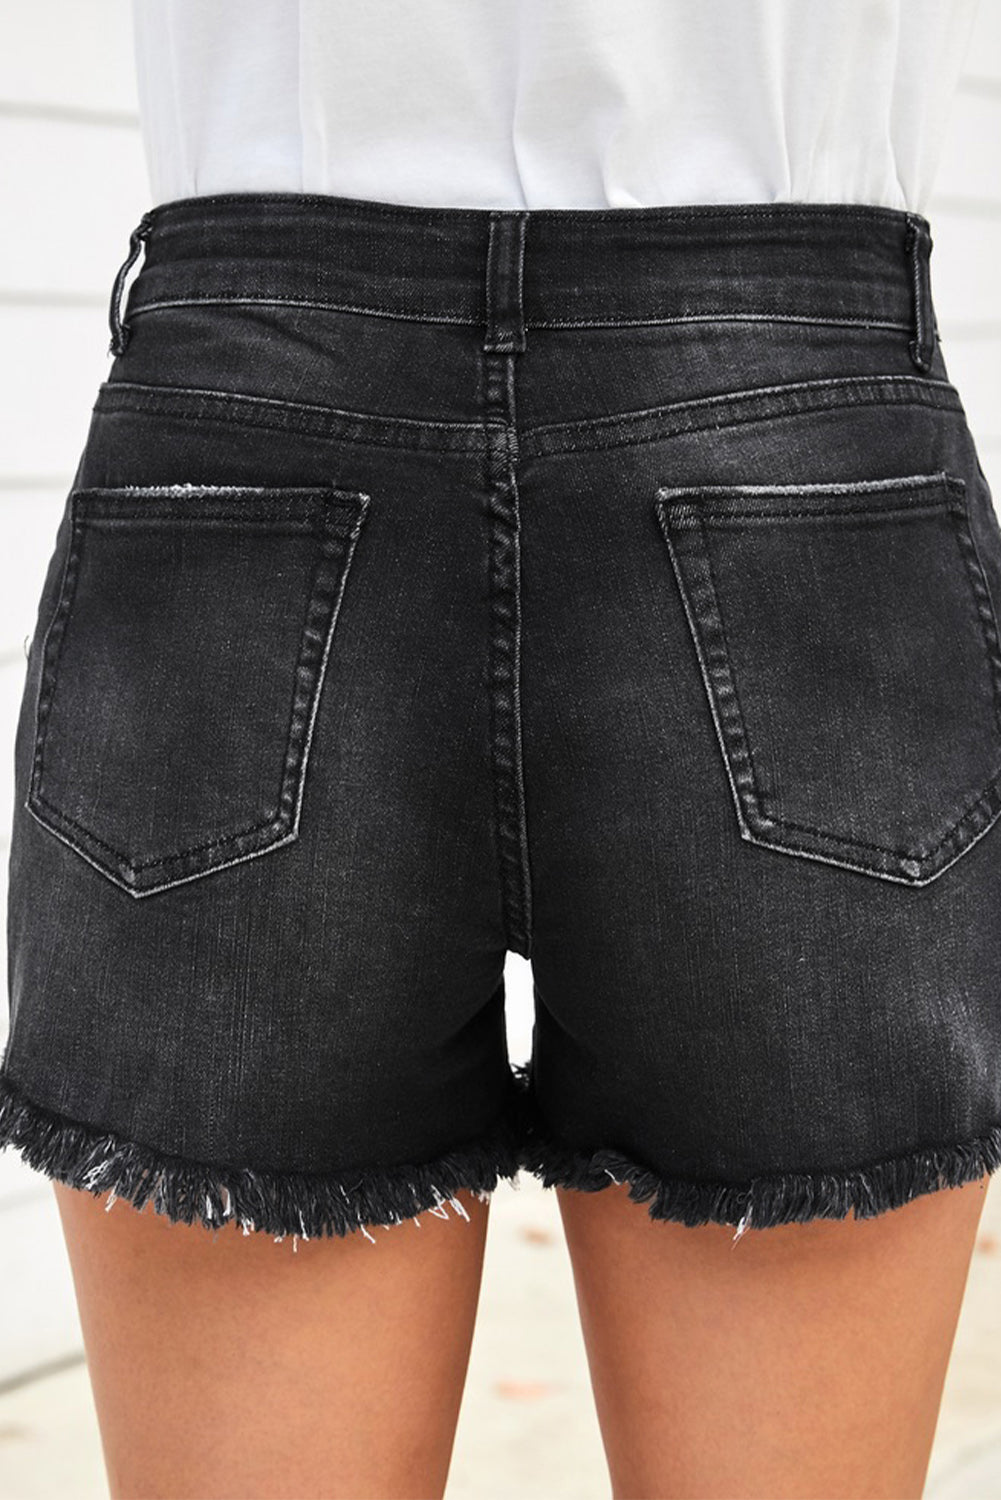 Raw Hem Distressed Denim Shorts with Pockets - Women’s Clothing & Accessories - Shorts - 3 - 2024